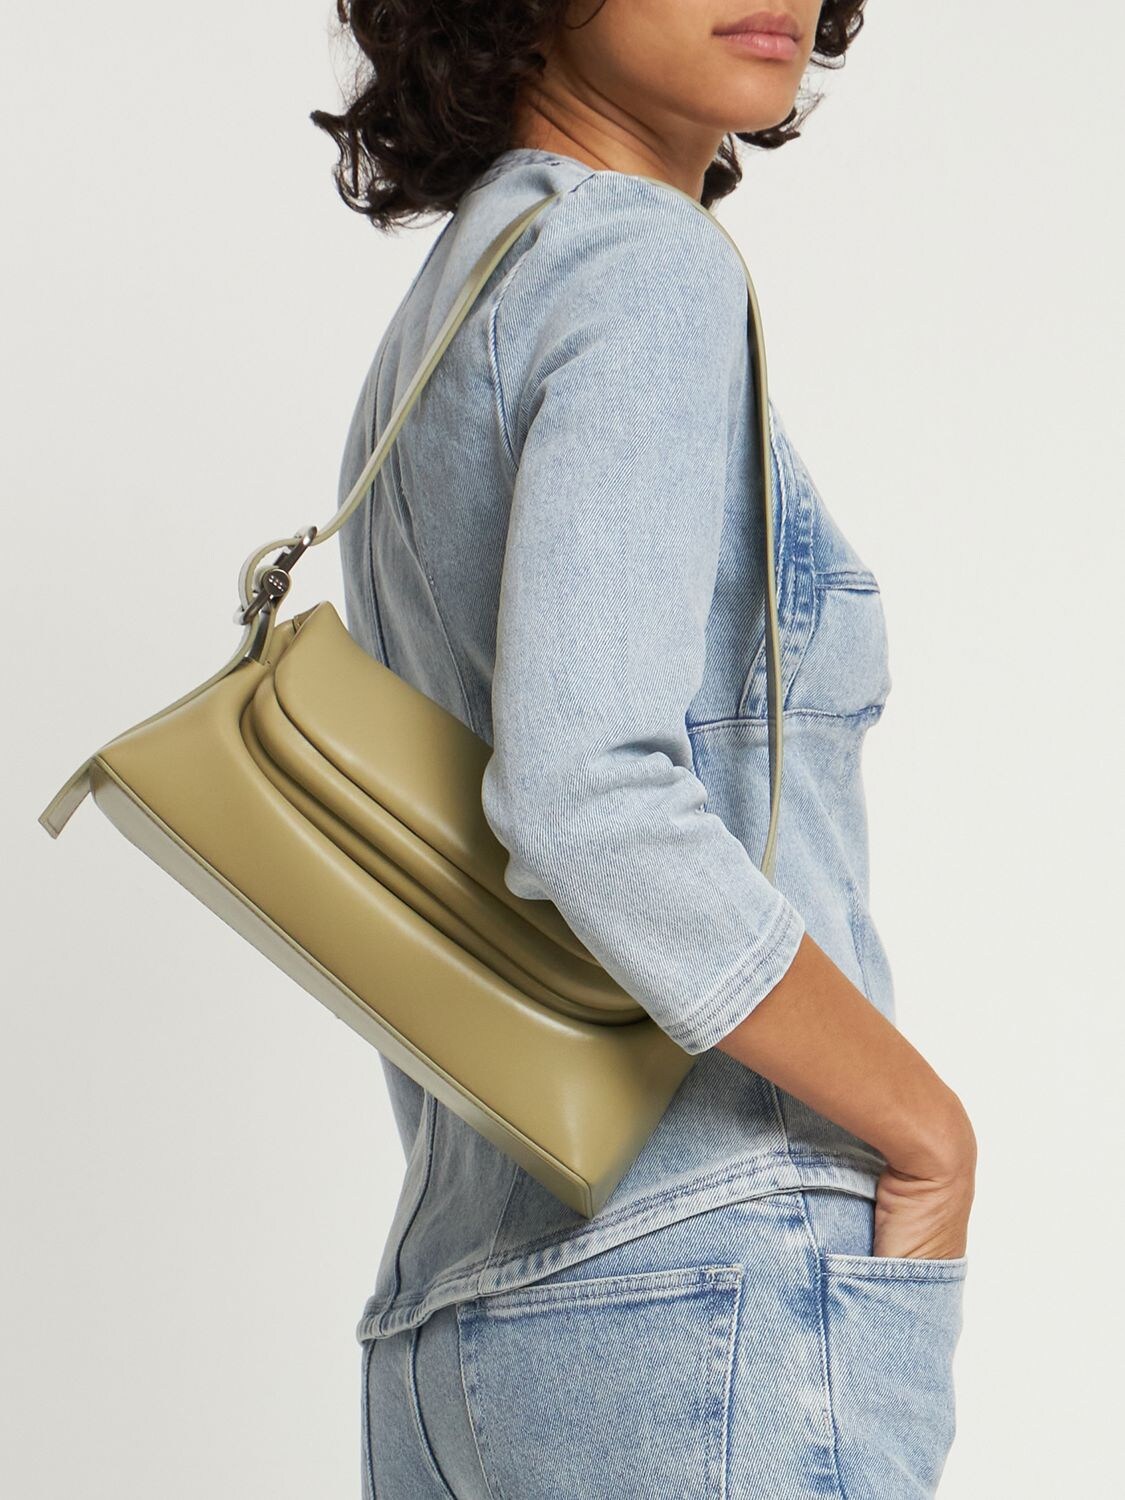 OSOI Belted Brocle Bag In Brown,at Urban Outfitters